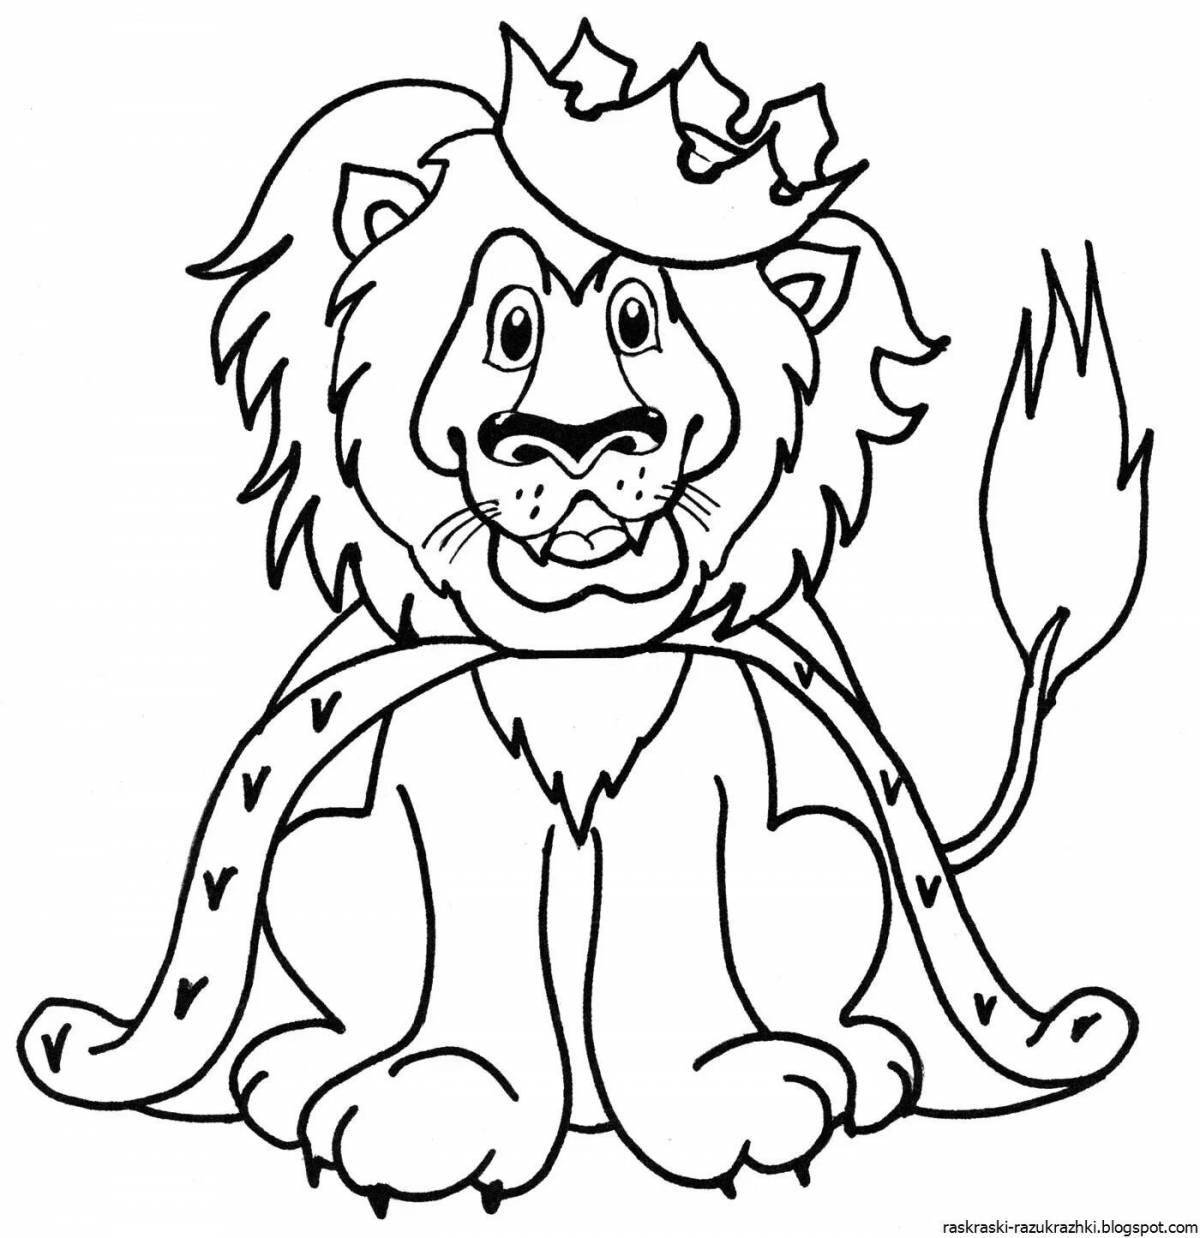 Fairy lion coloring book for 3-4 year olds